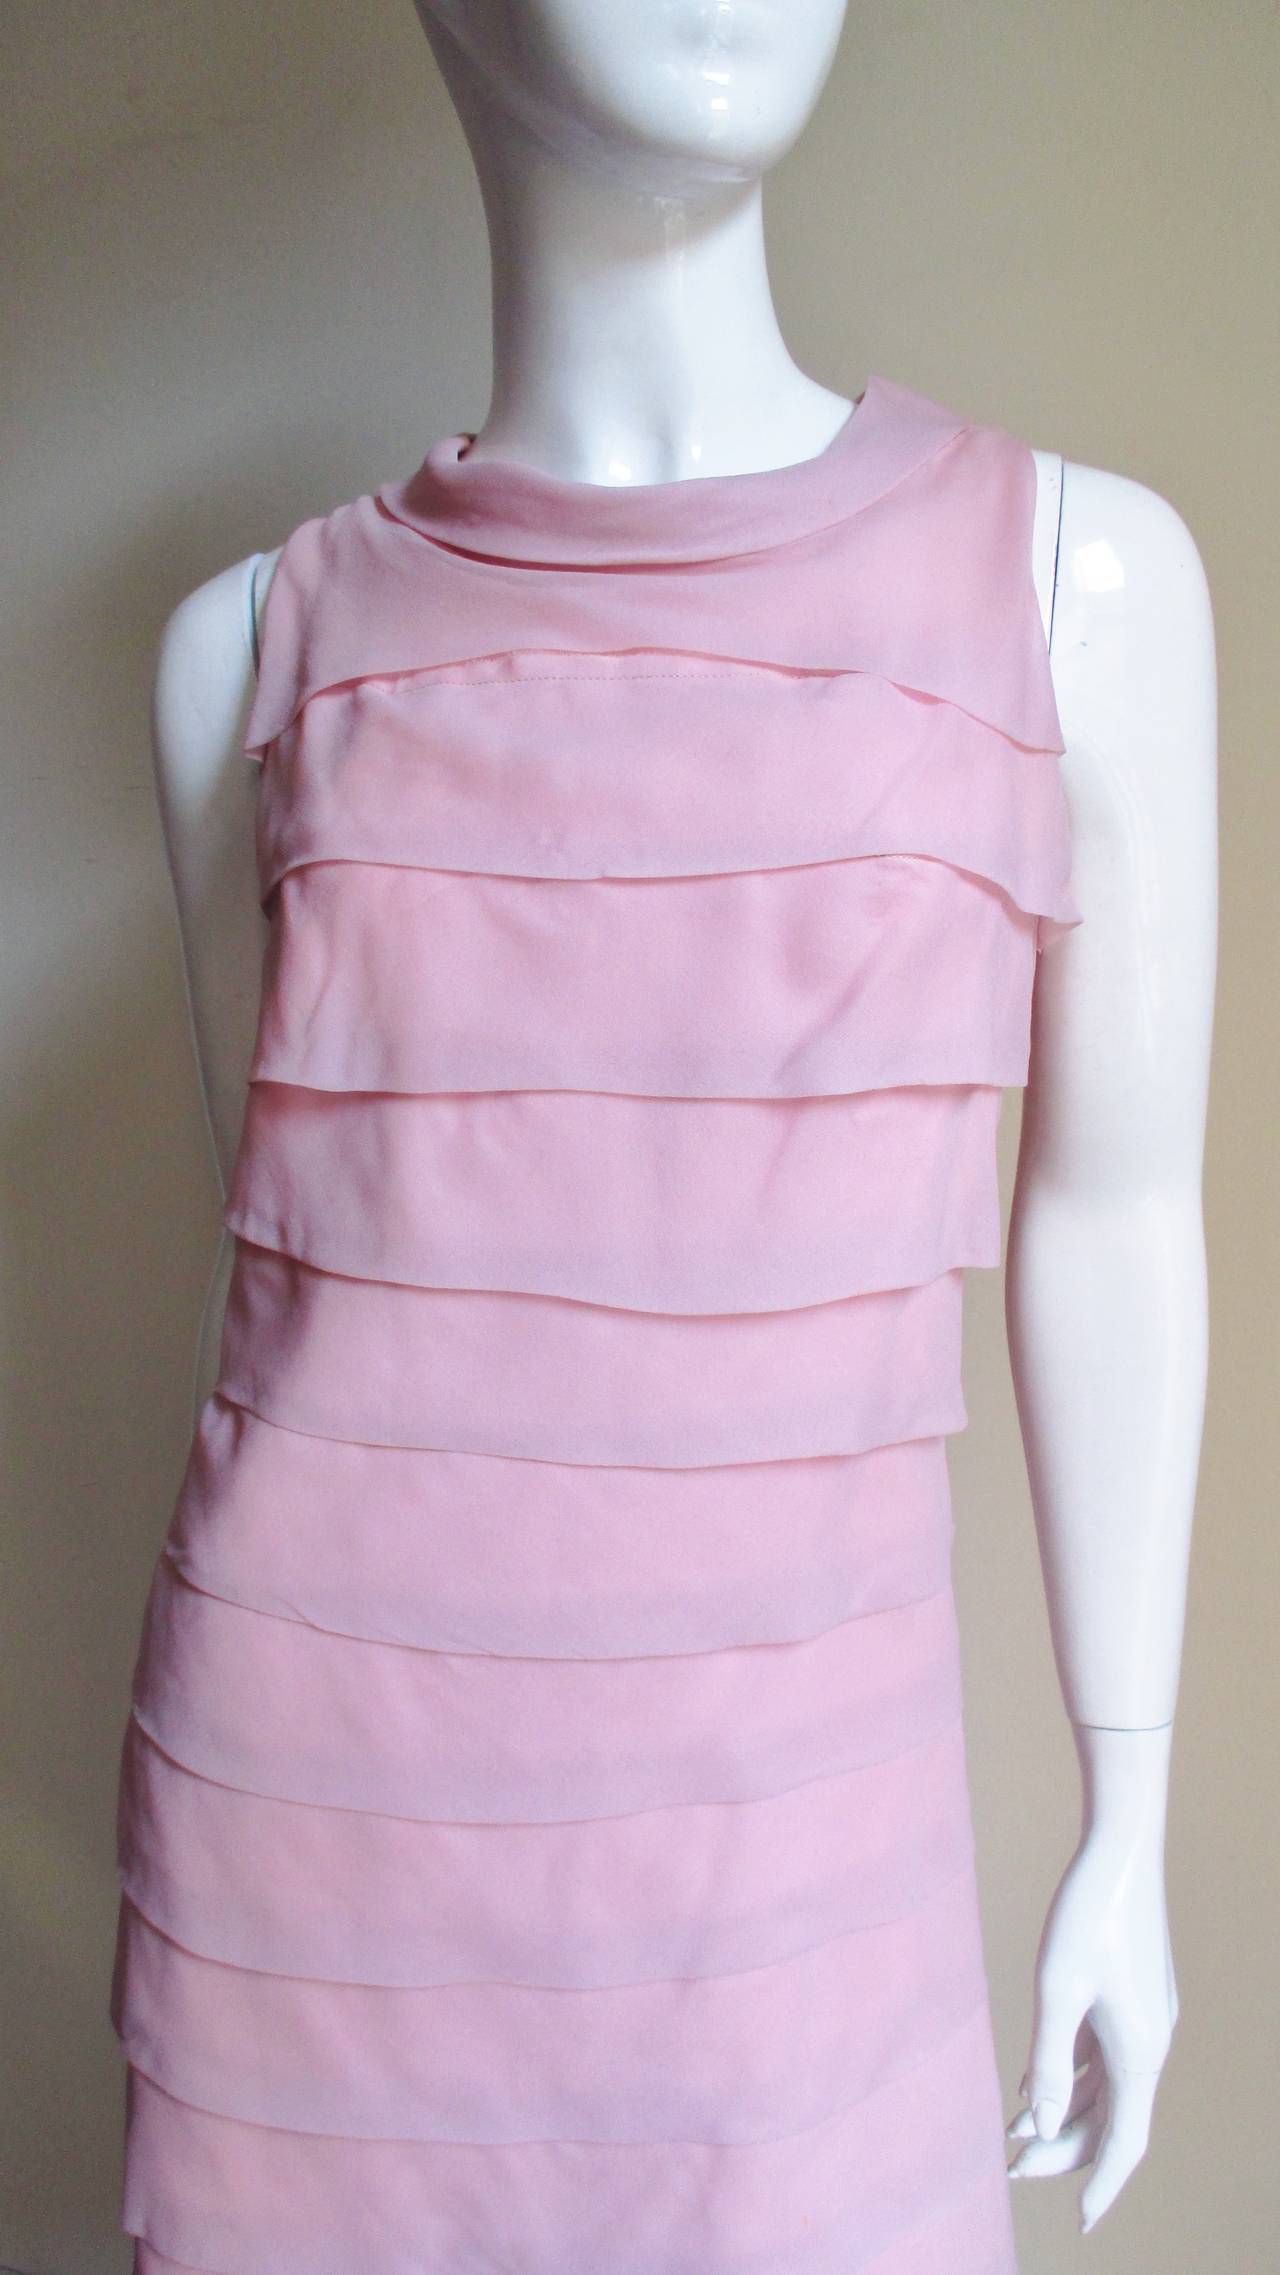 A pretty pink dress from Miss Elliette.  It is a sleeveless slightly A line dress with a rolled collar and horizontal rows of overlapping folds around it's circumference the entire length of the dress. It is fully lined with a back zipper.
Fits